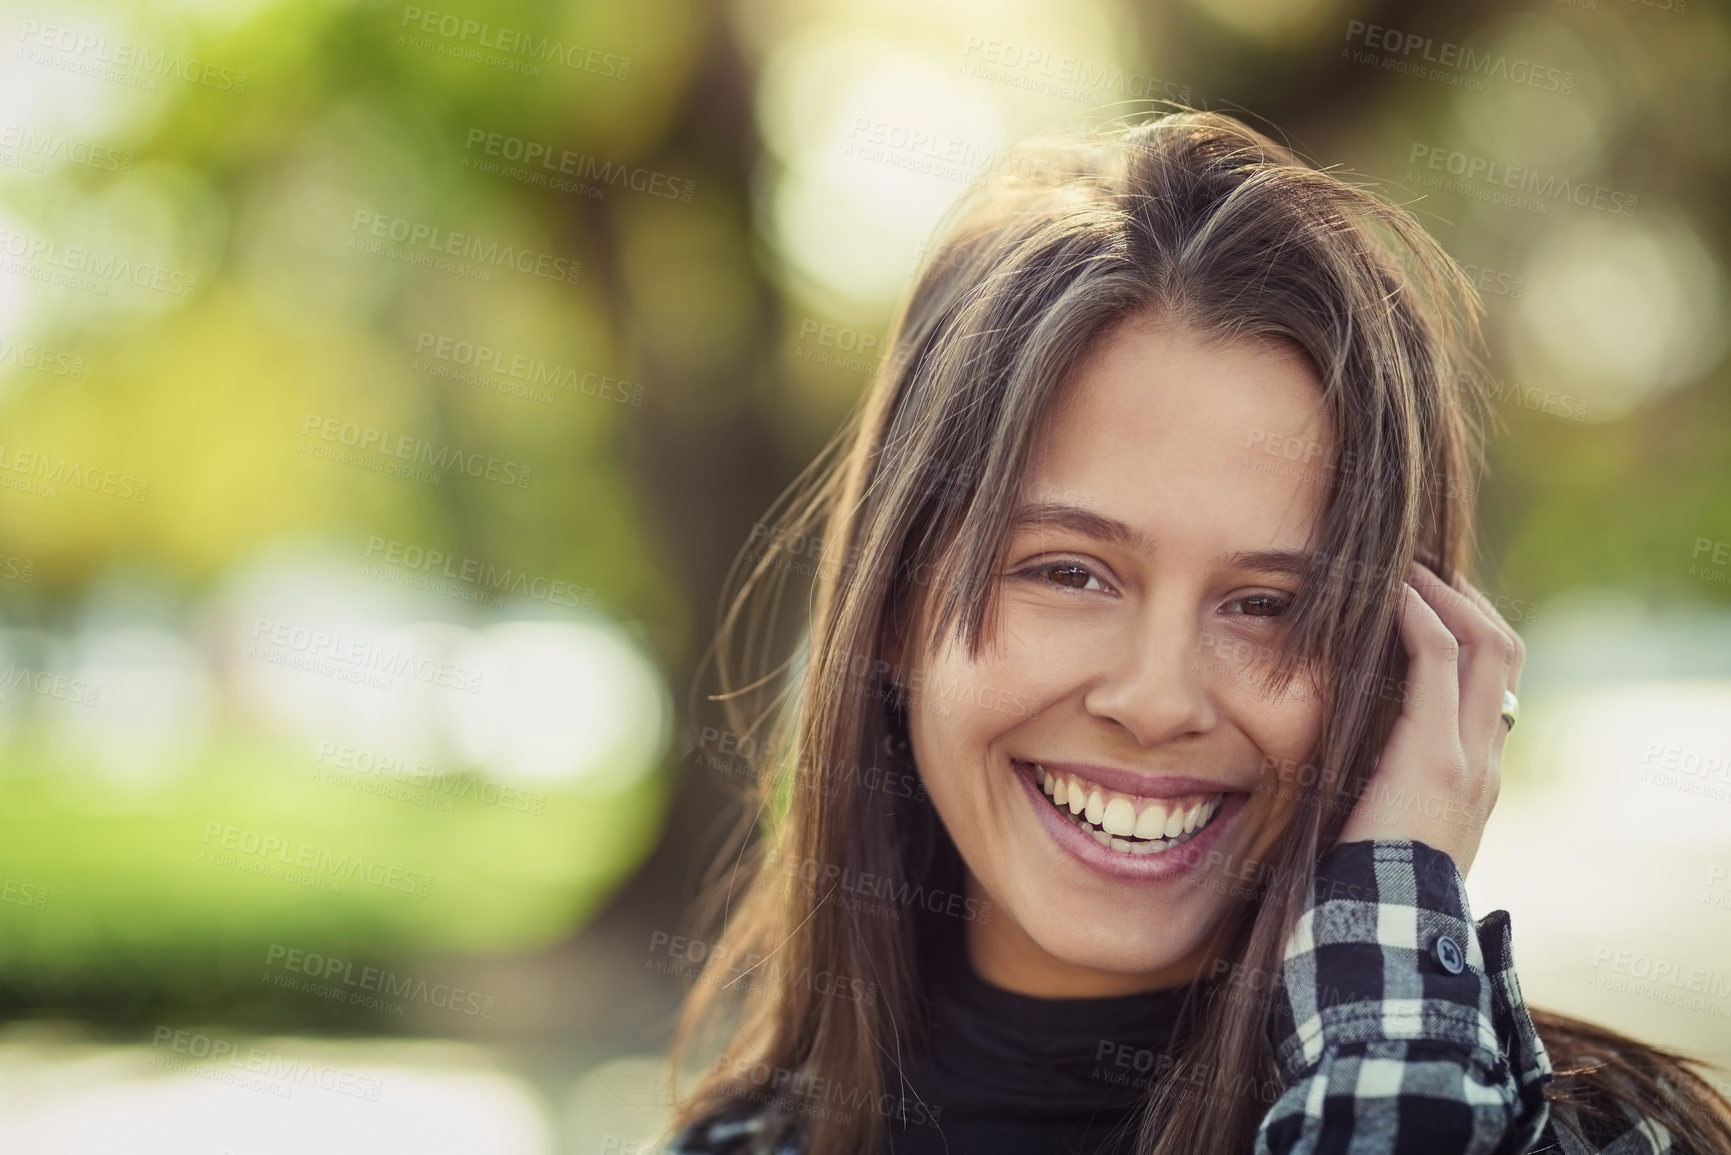 Buy stock photo Cropped portrait of an attractive young woman spending a day in the park